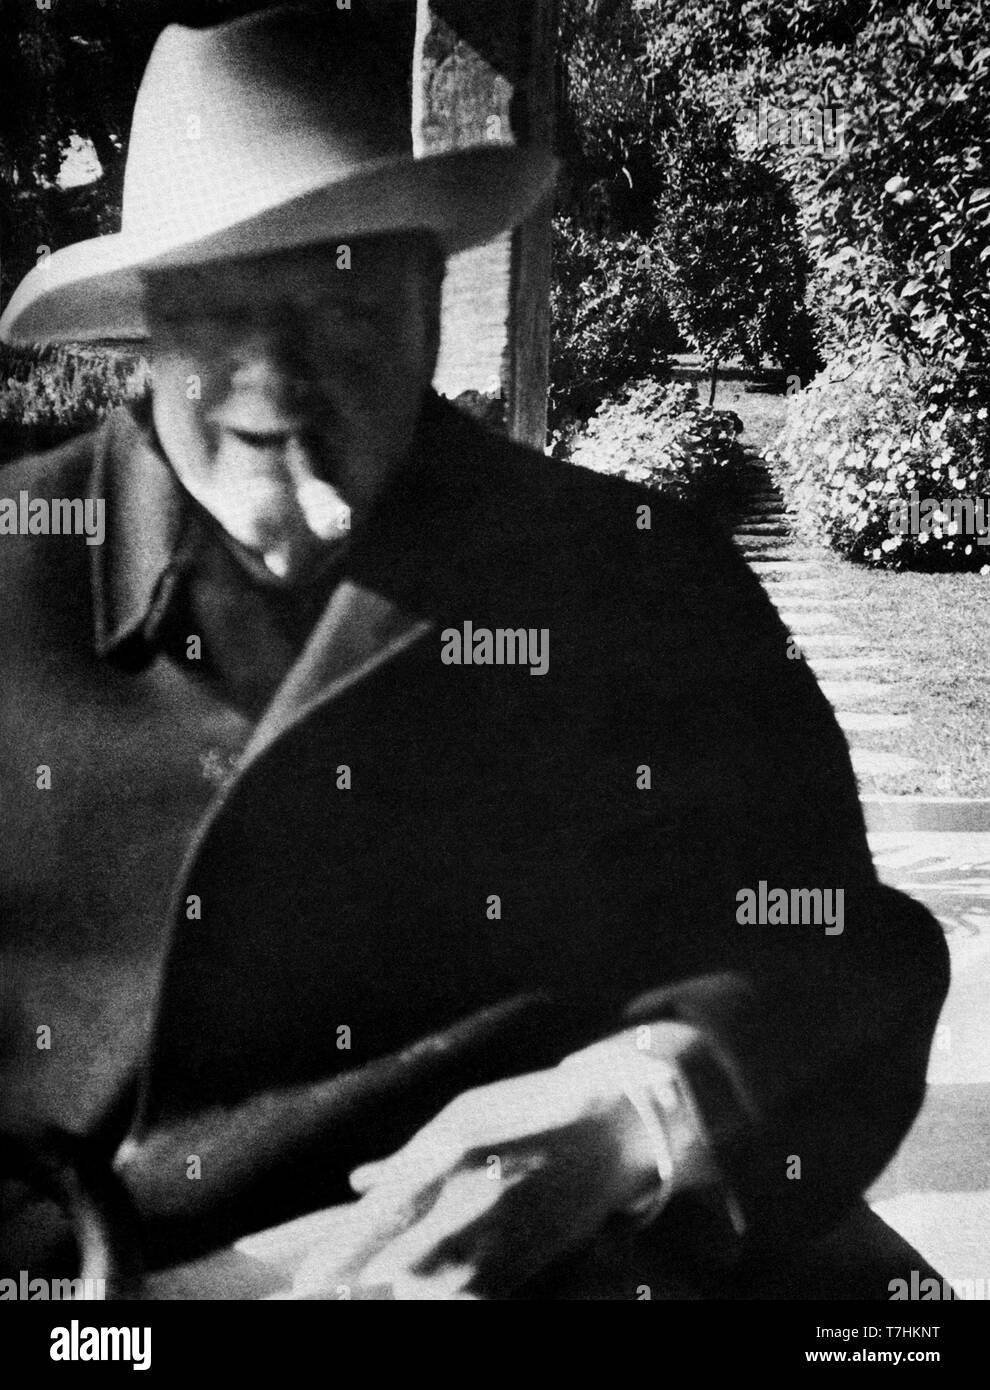 Winston Churchill in late age enjoying a garden in the South of France Stock Photo